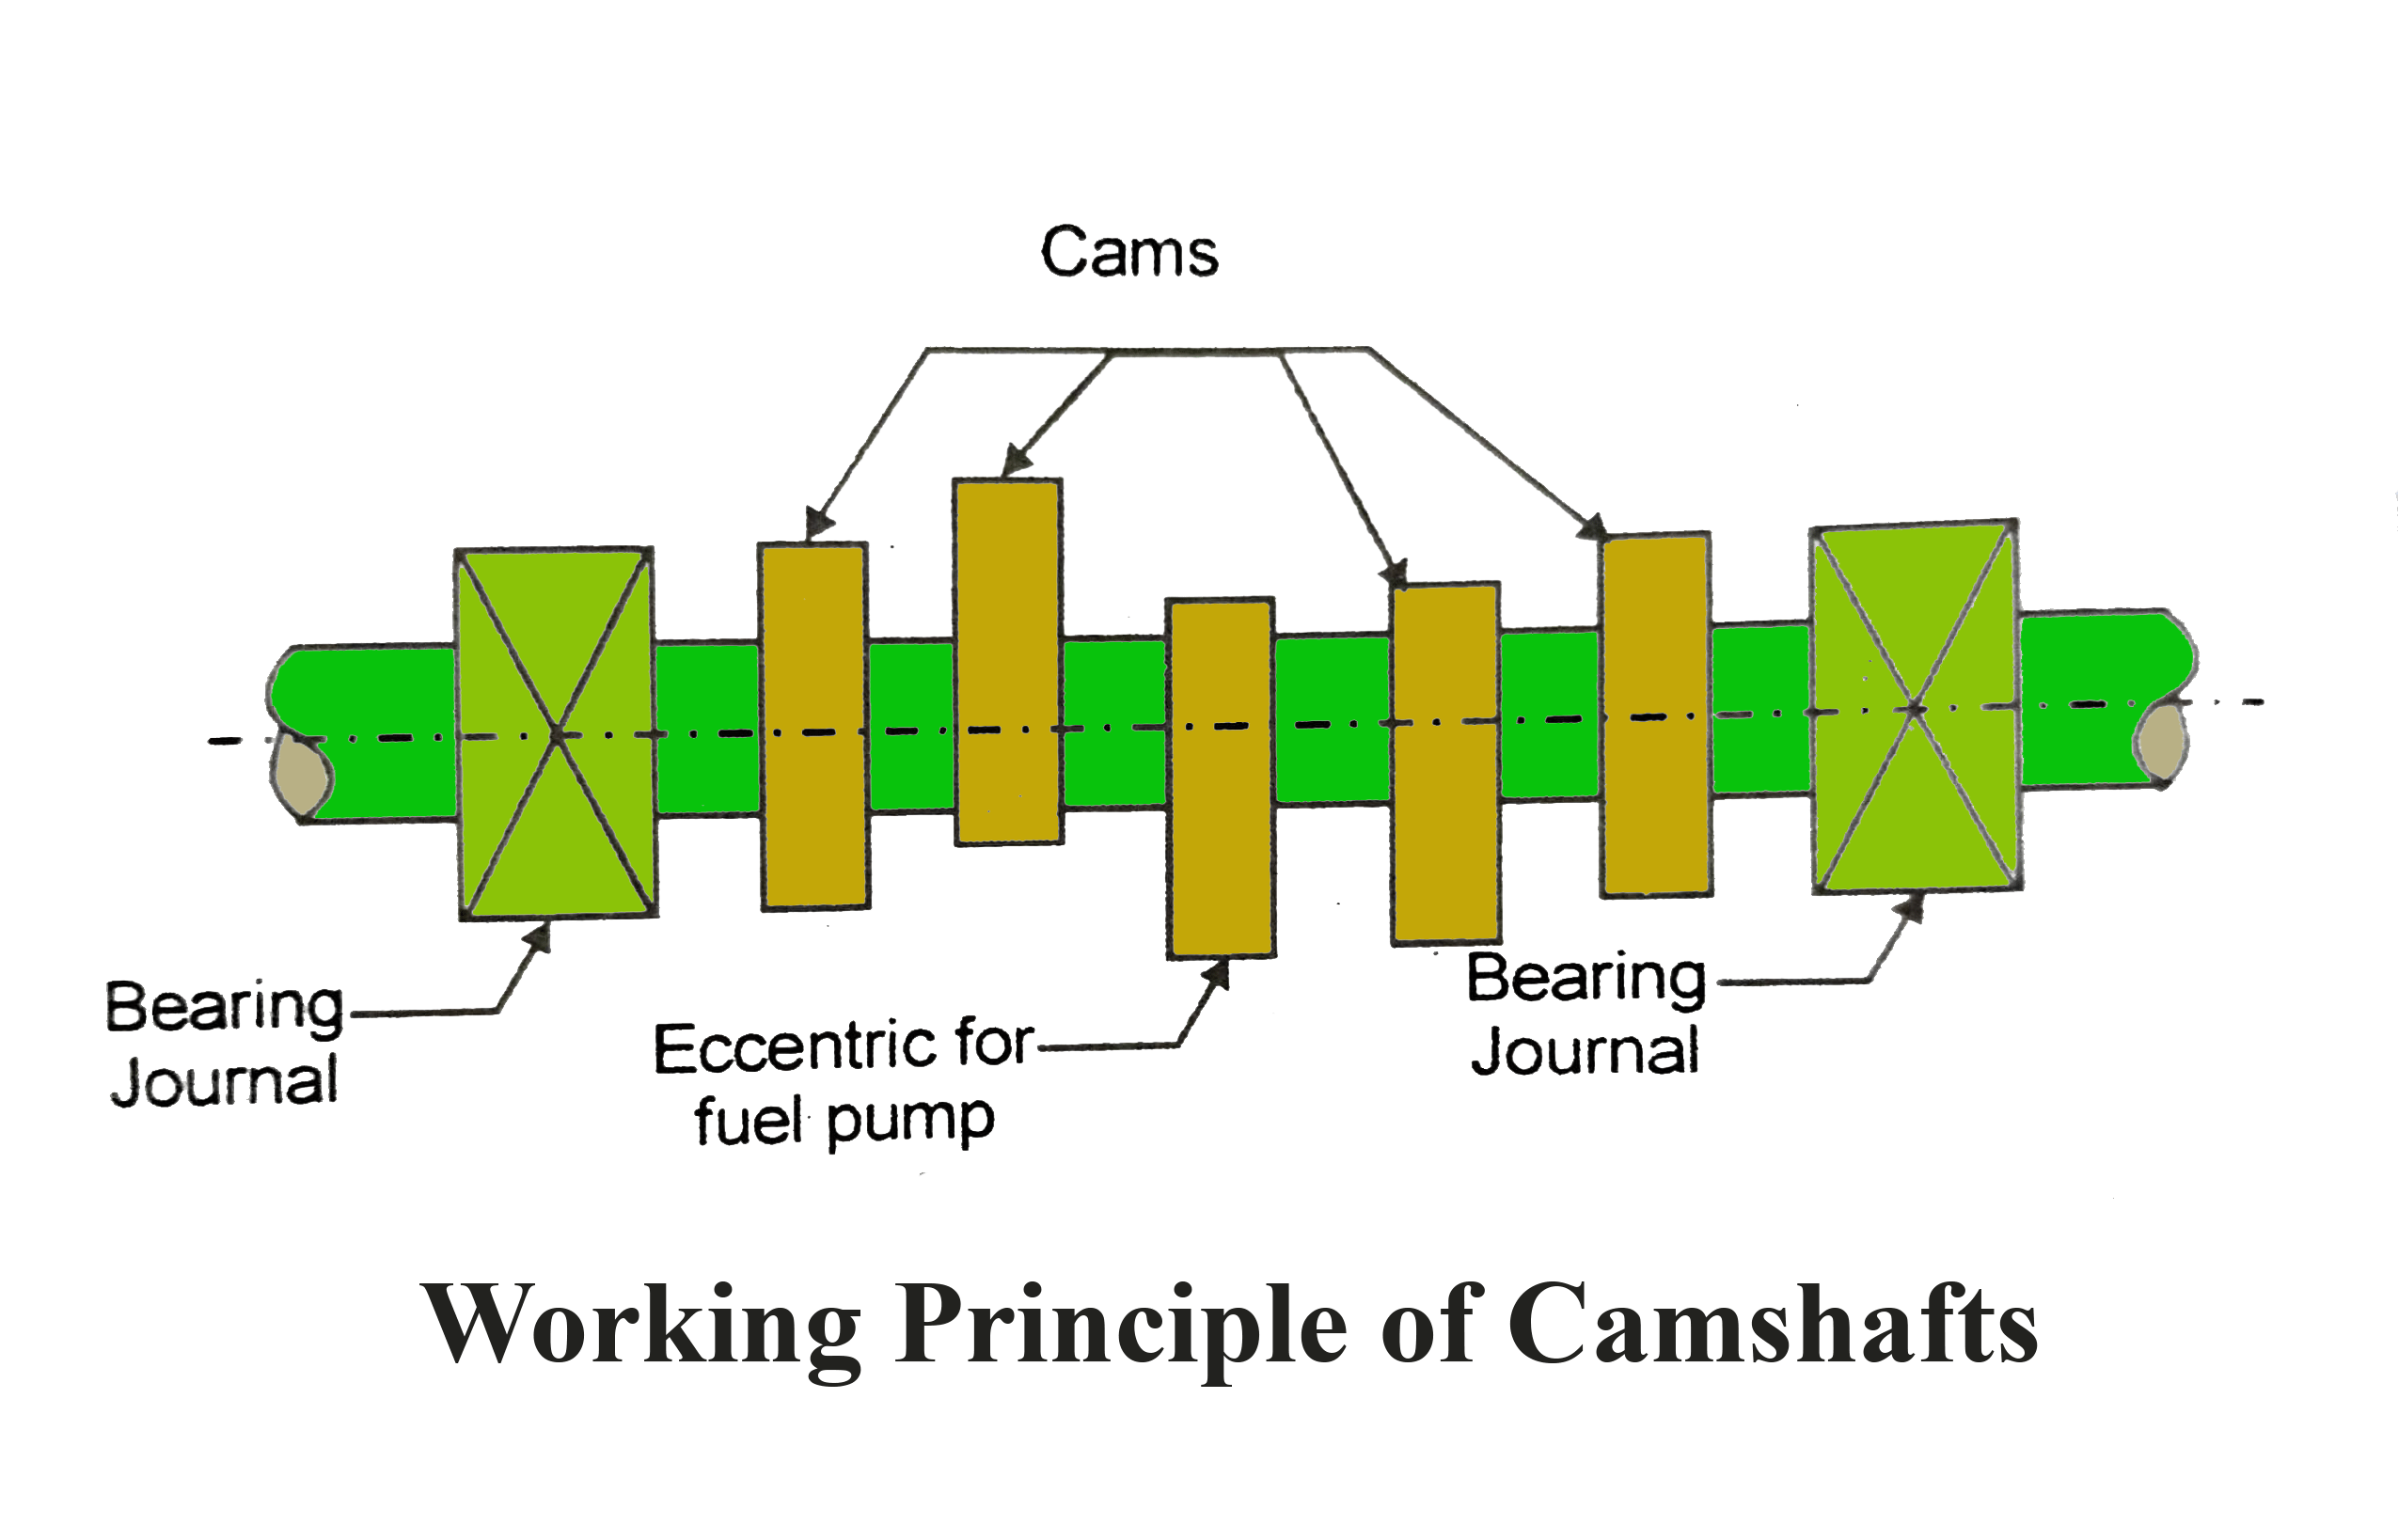 What is thе Working Principlе of Camshafts